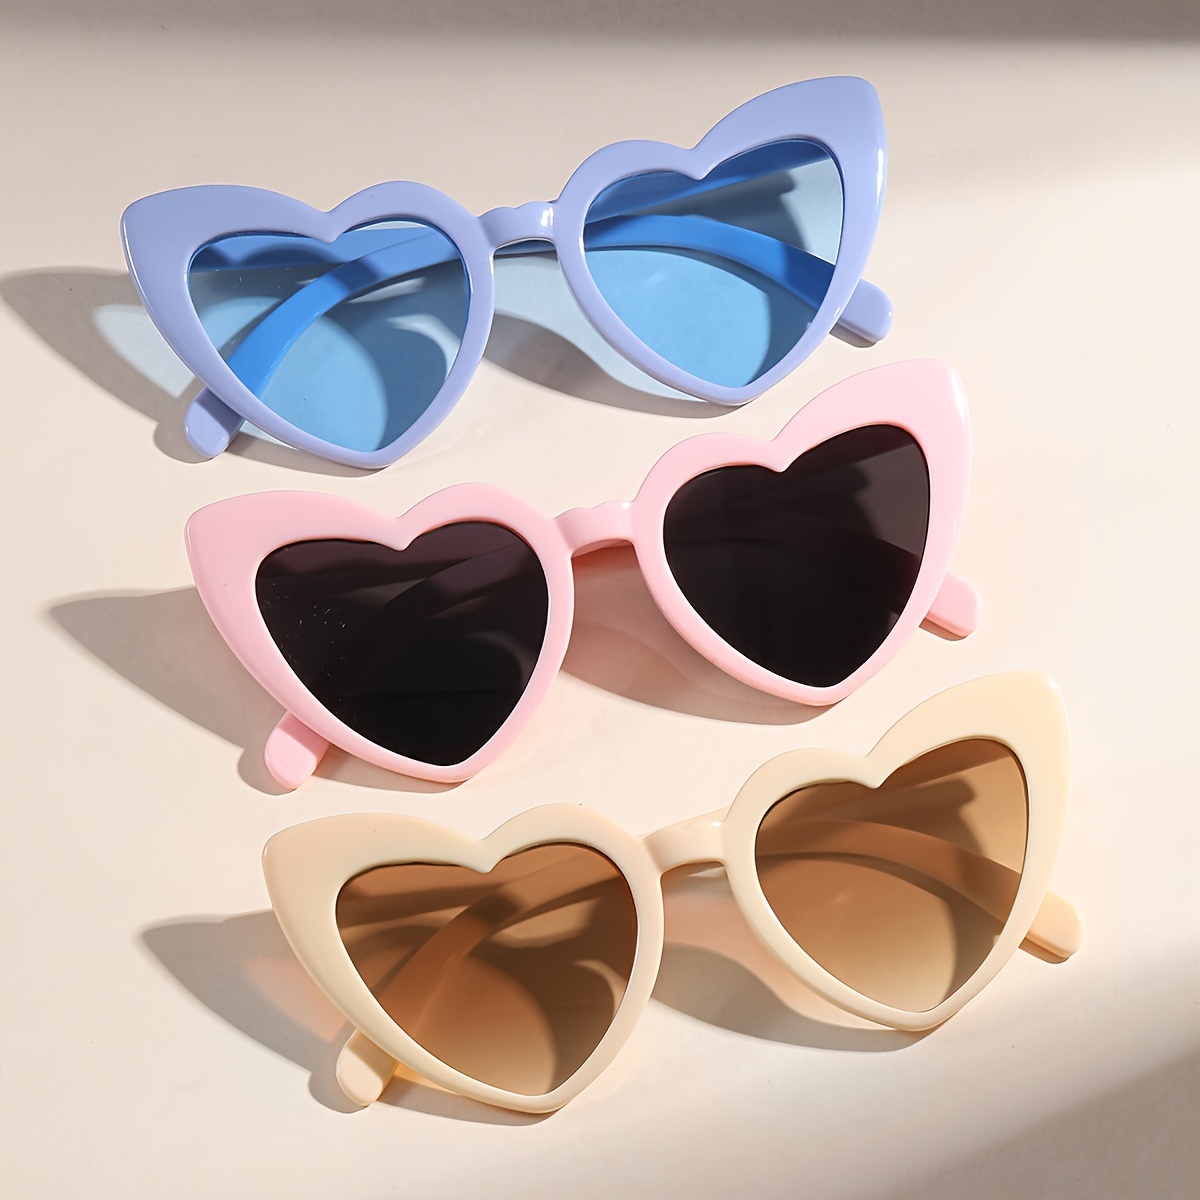 

3pcs Heart Shaped Fashion Glasses For Women Cute Candy Color Fashion Decorative Shades For Costume Wedding Party For Music Festival